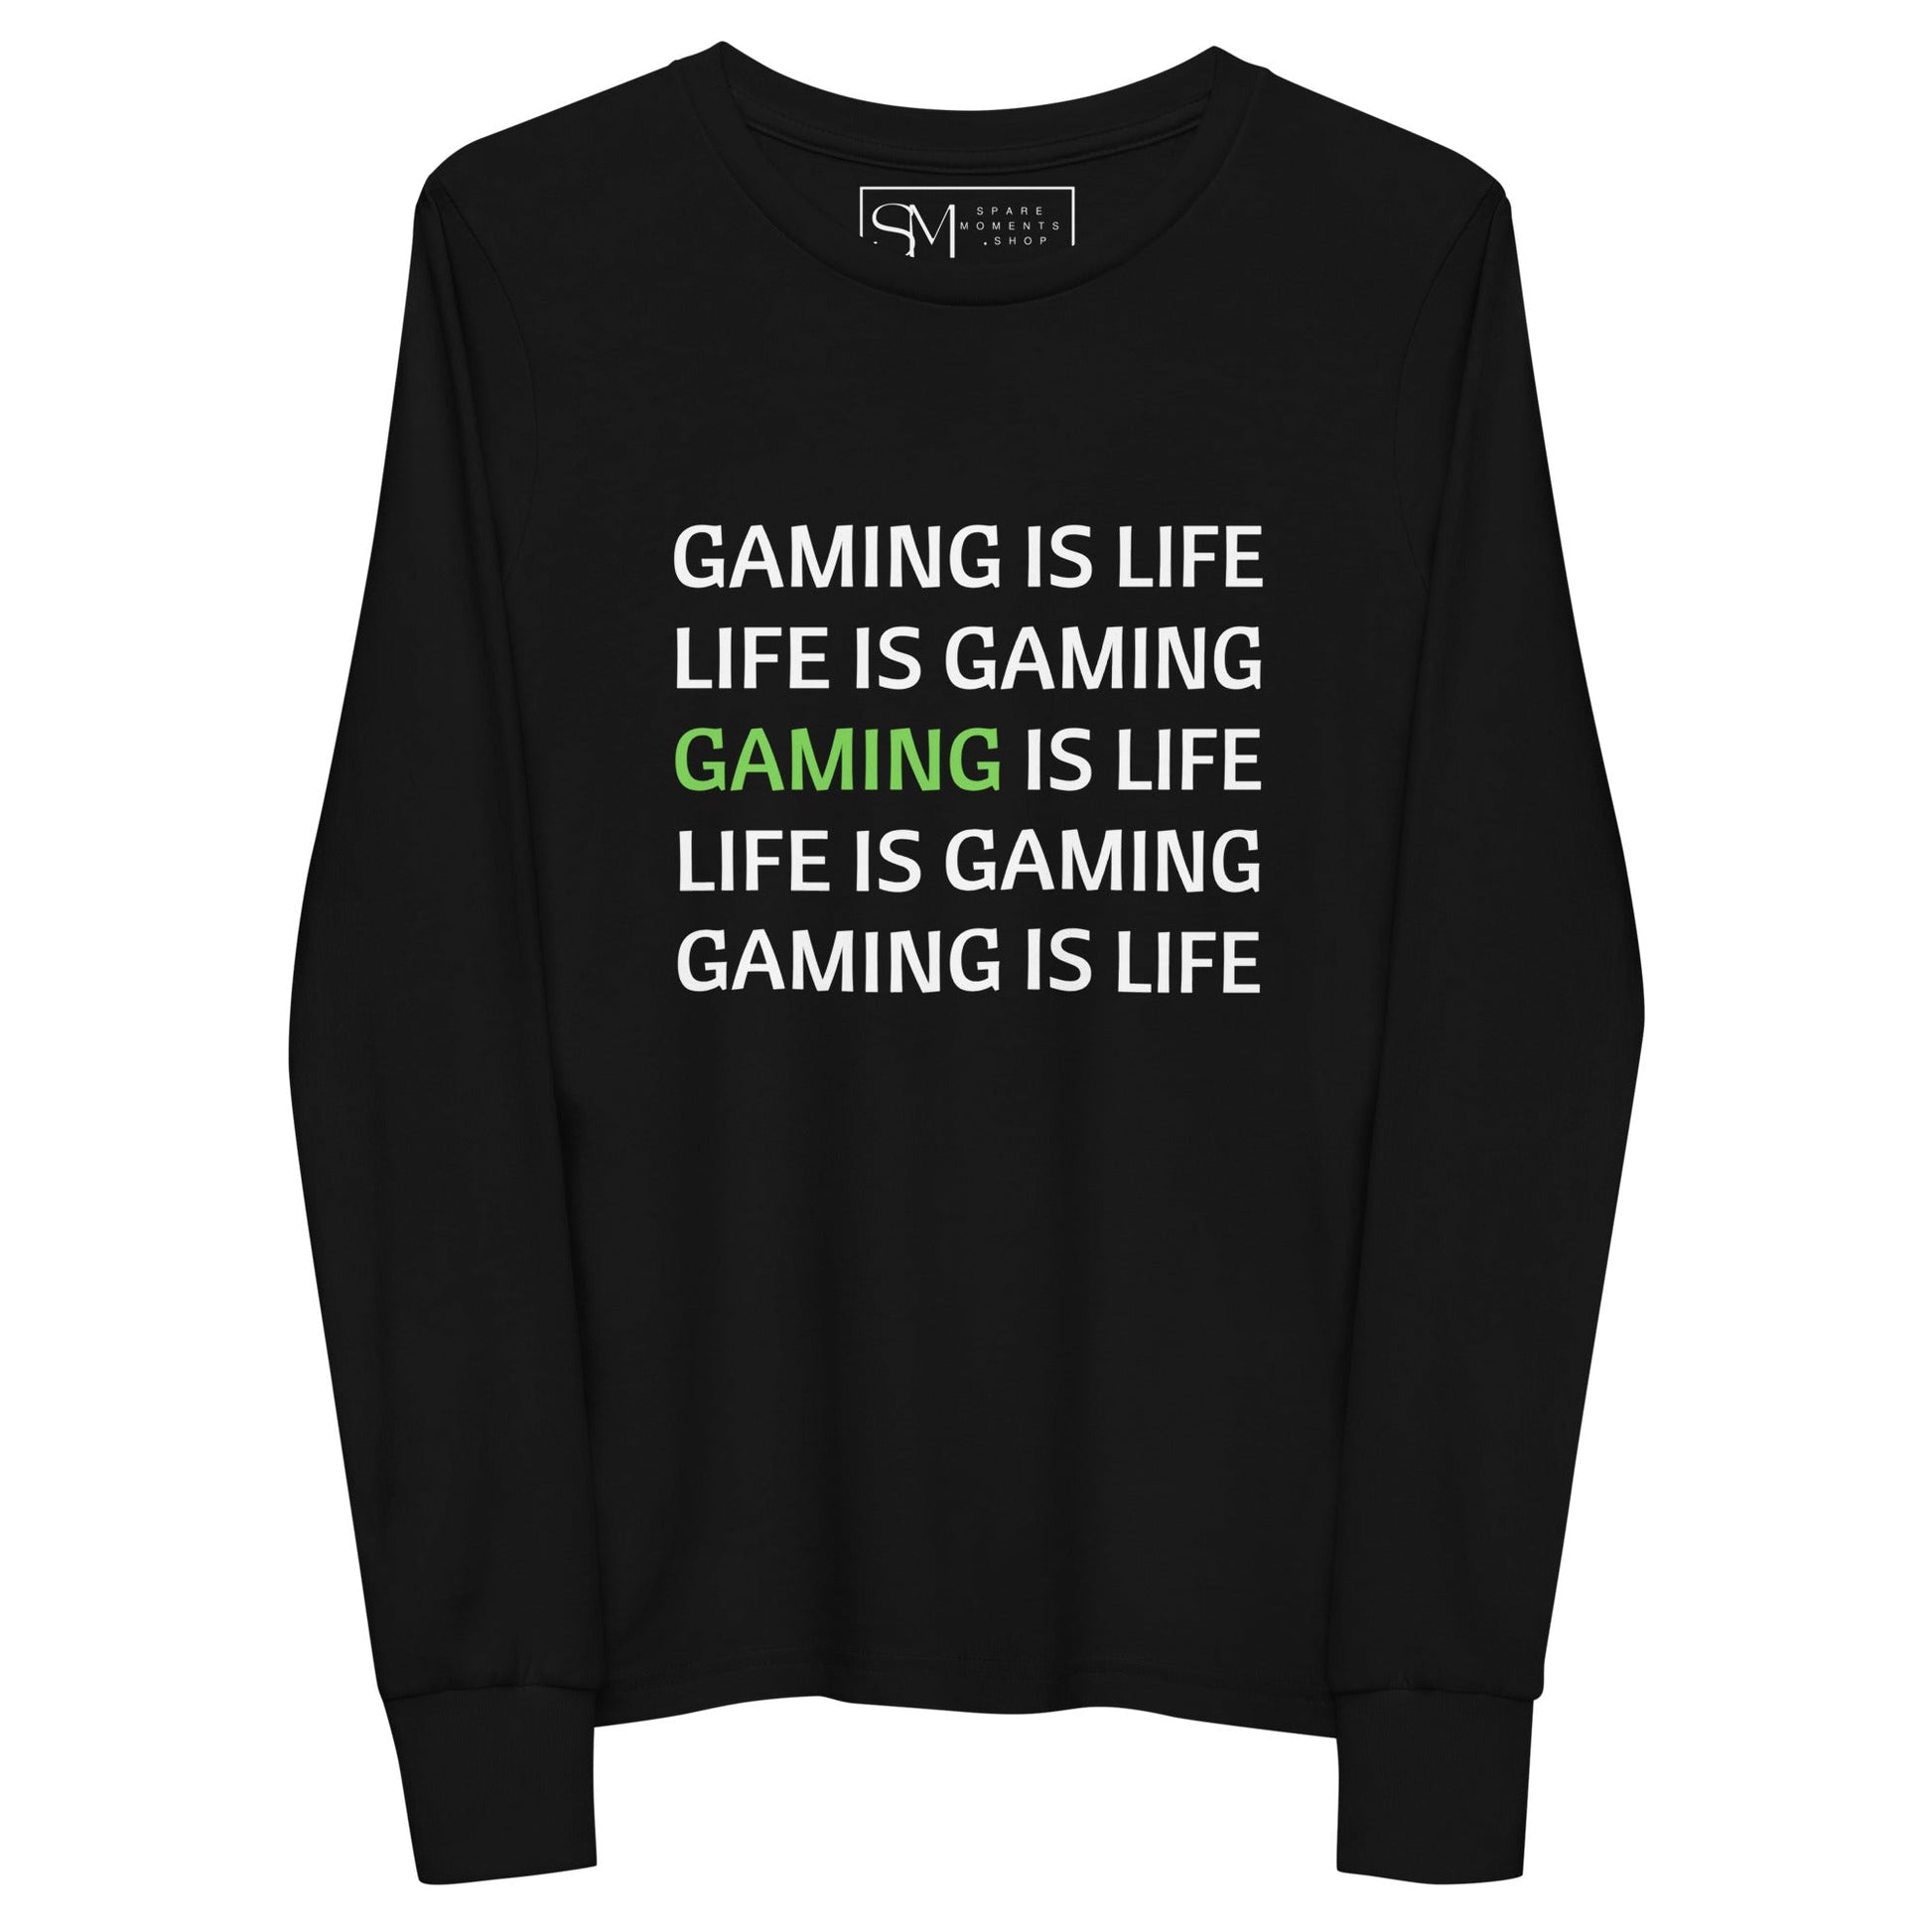 GAMING IS LIFE | Youth long sleeve tee